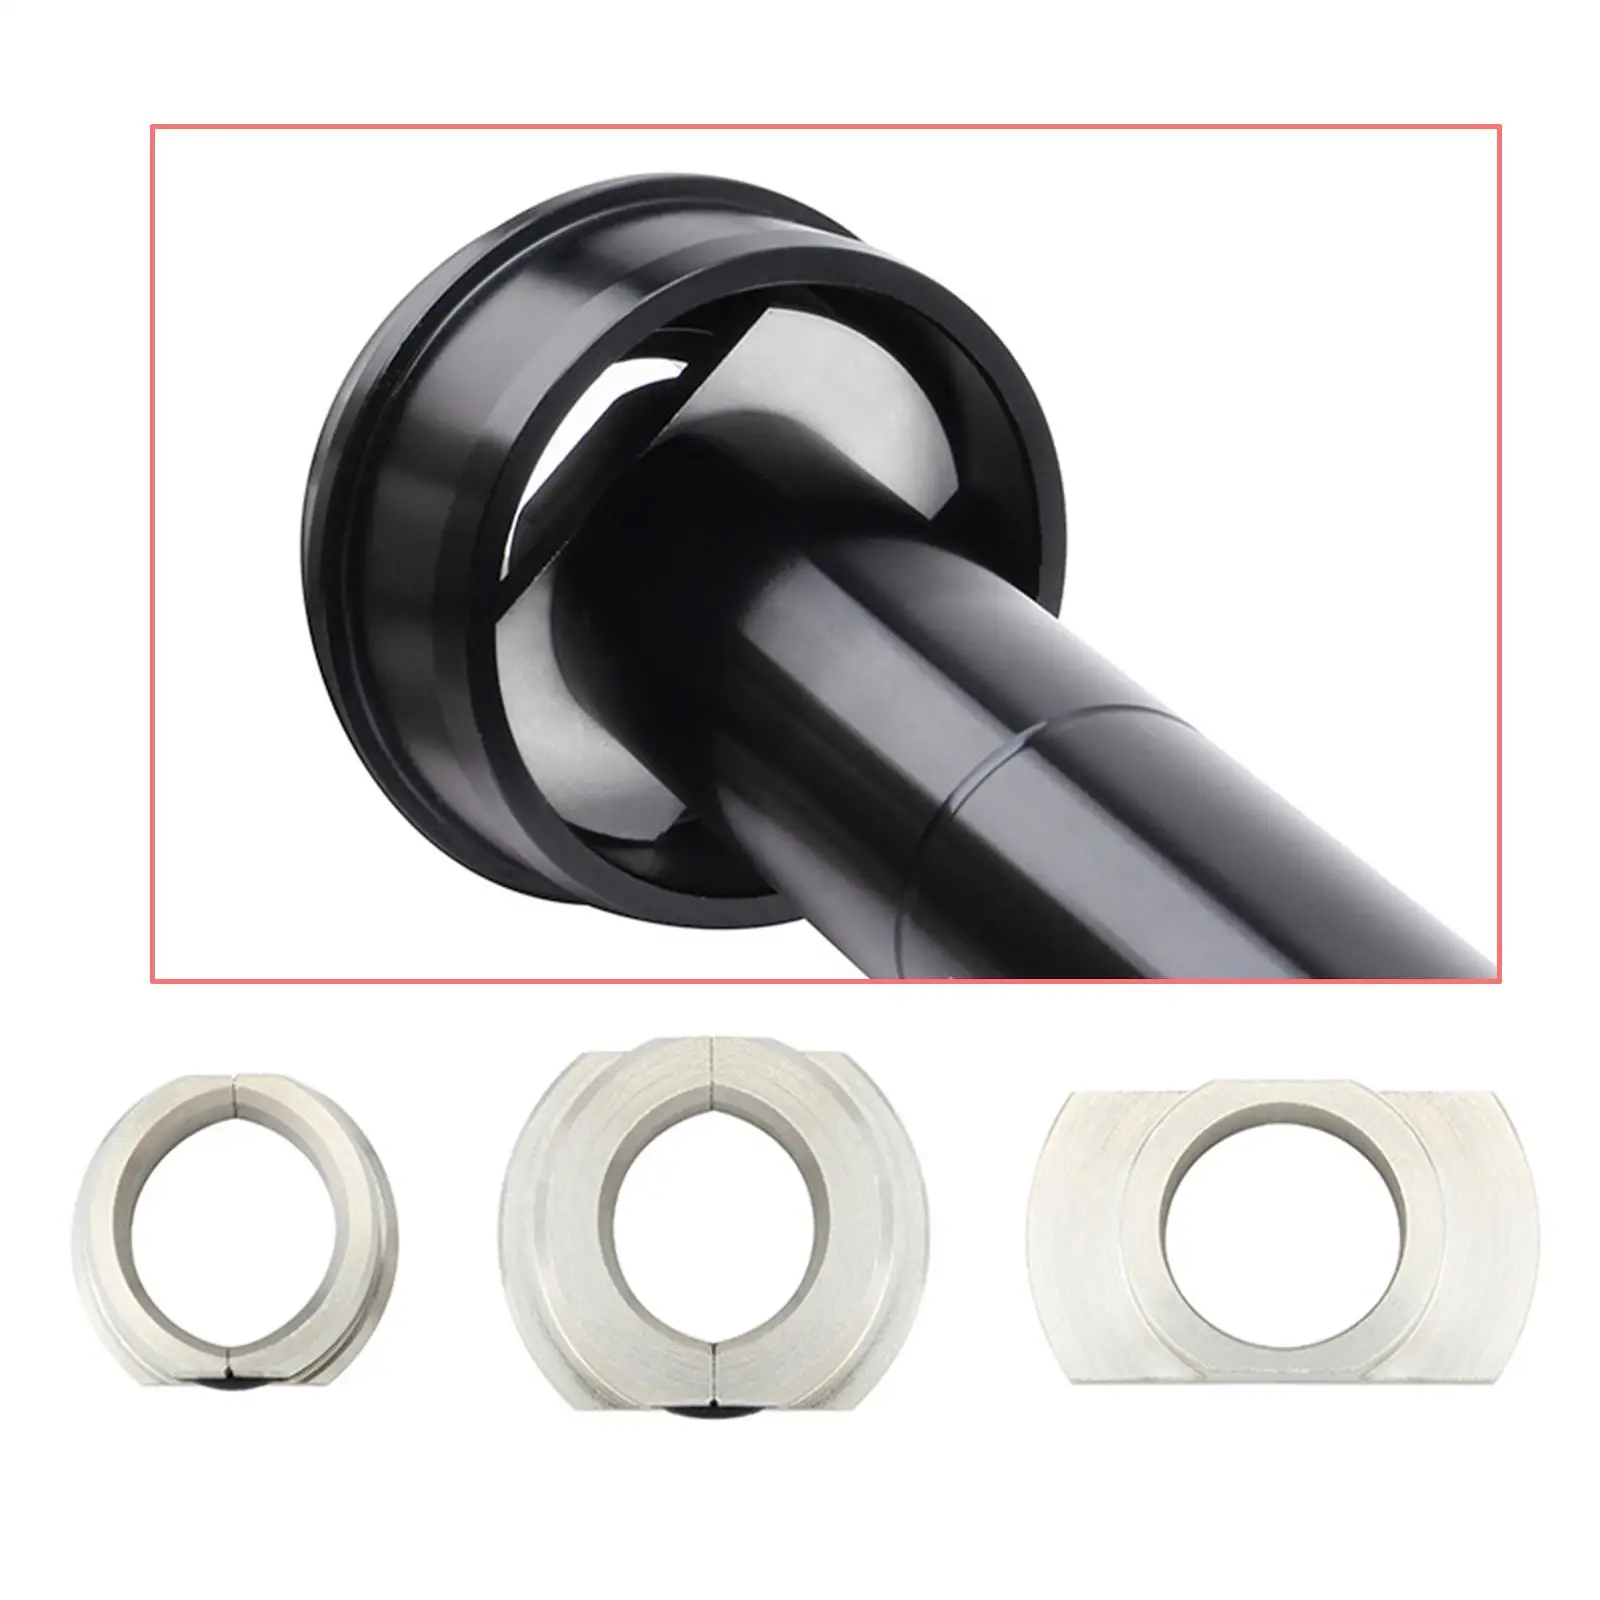 Bottom Bracket Conversion Professional Bike Accessories Cycling Accessories